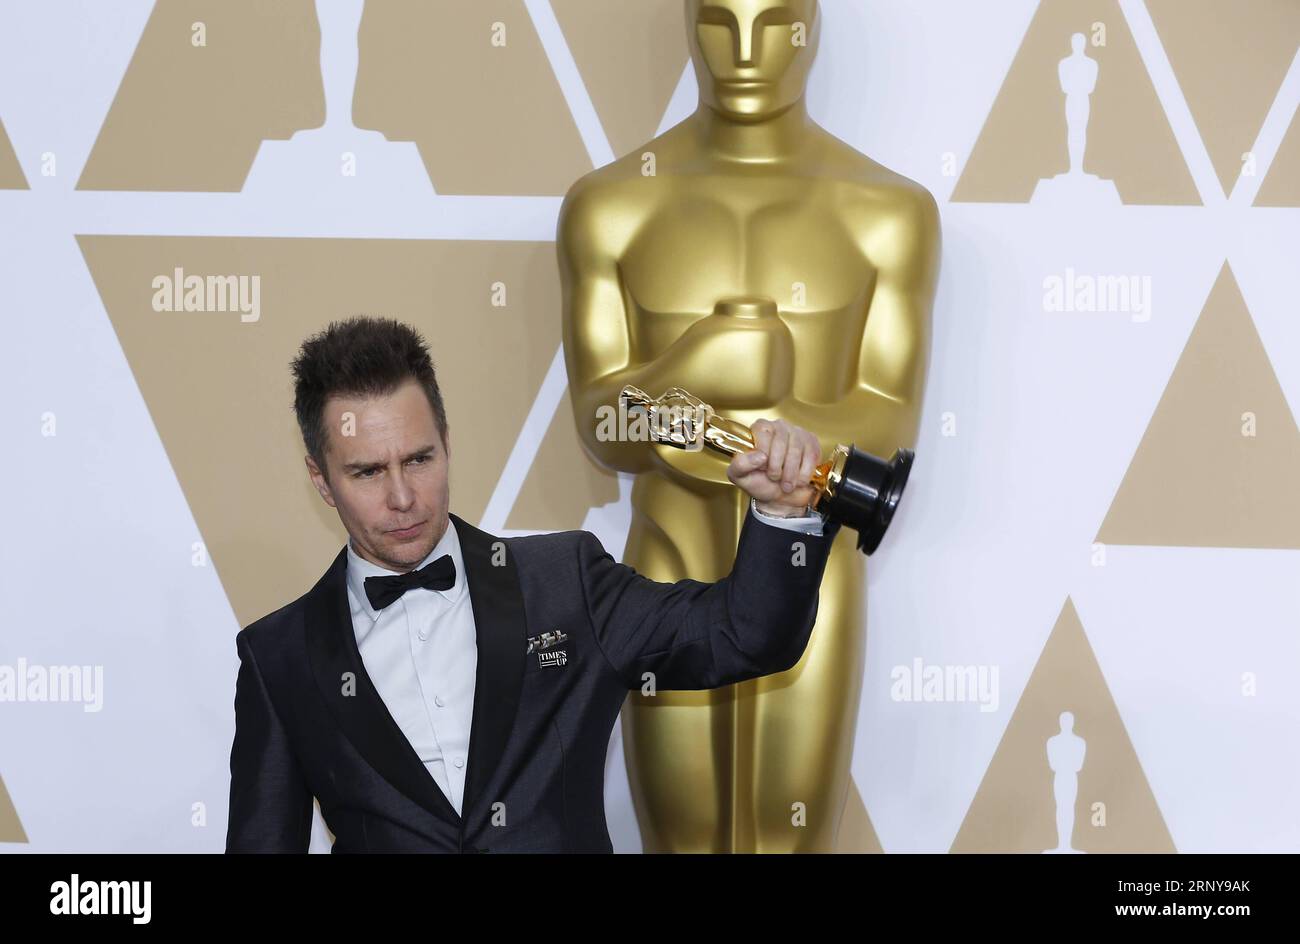 (180305) -- LOS ANGELES, March 5, 2018 -- Actor Sam Rockwell poses after winning the Best Supporting Actor award for his role in Three Billboards outside Ebbing, Missouri at press room of the 90th Academy Awards at the Dolby Theater in Los Angeles, the United States, on March 4, 2018. )(yy) U.S.-LOS ANGELES-OSCAR-AWARDS lixying PUBLICATIONxNOTxINxCHN Stock Photo